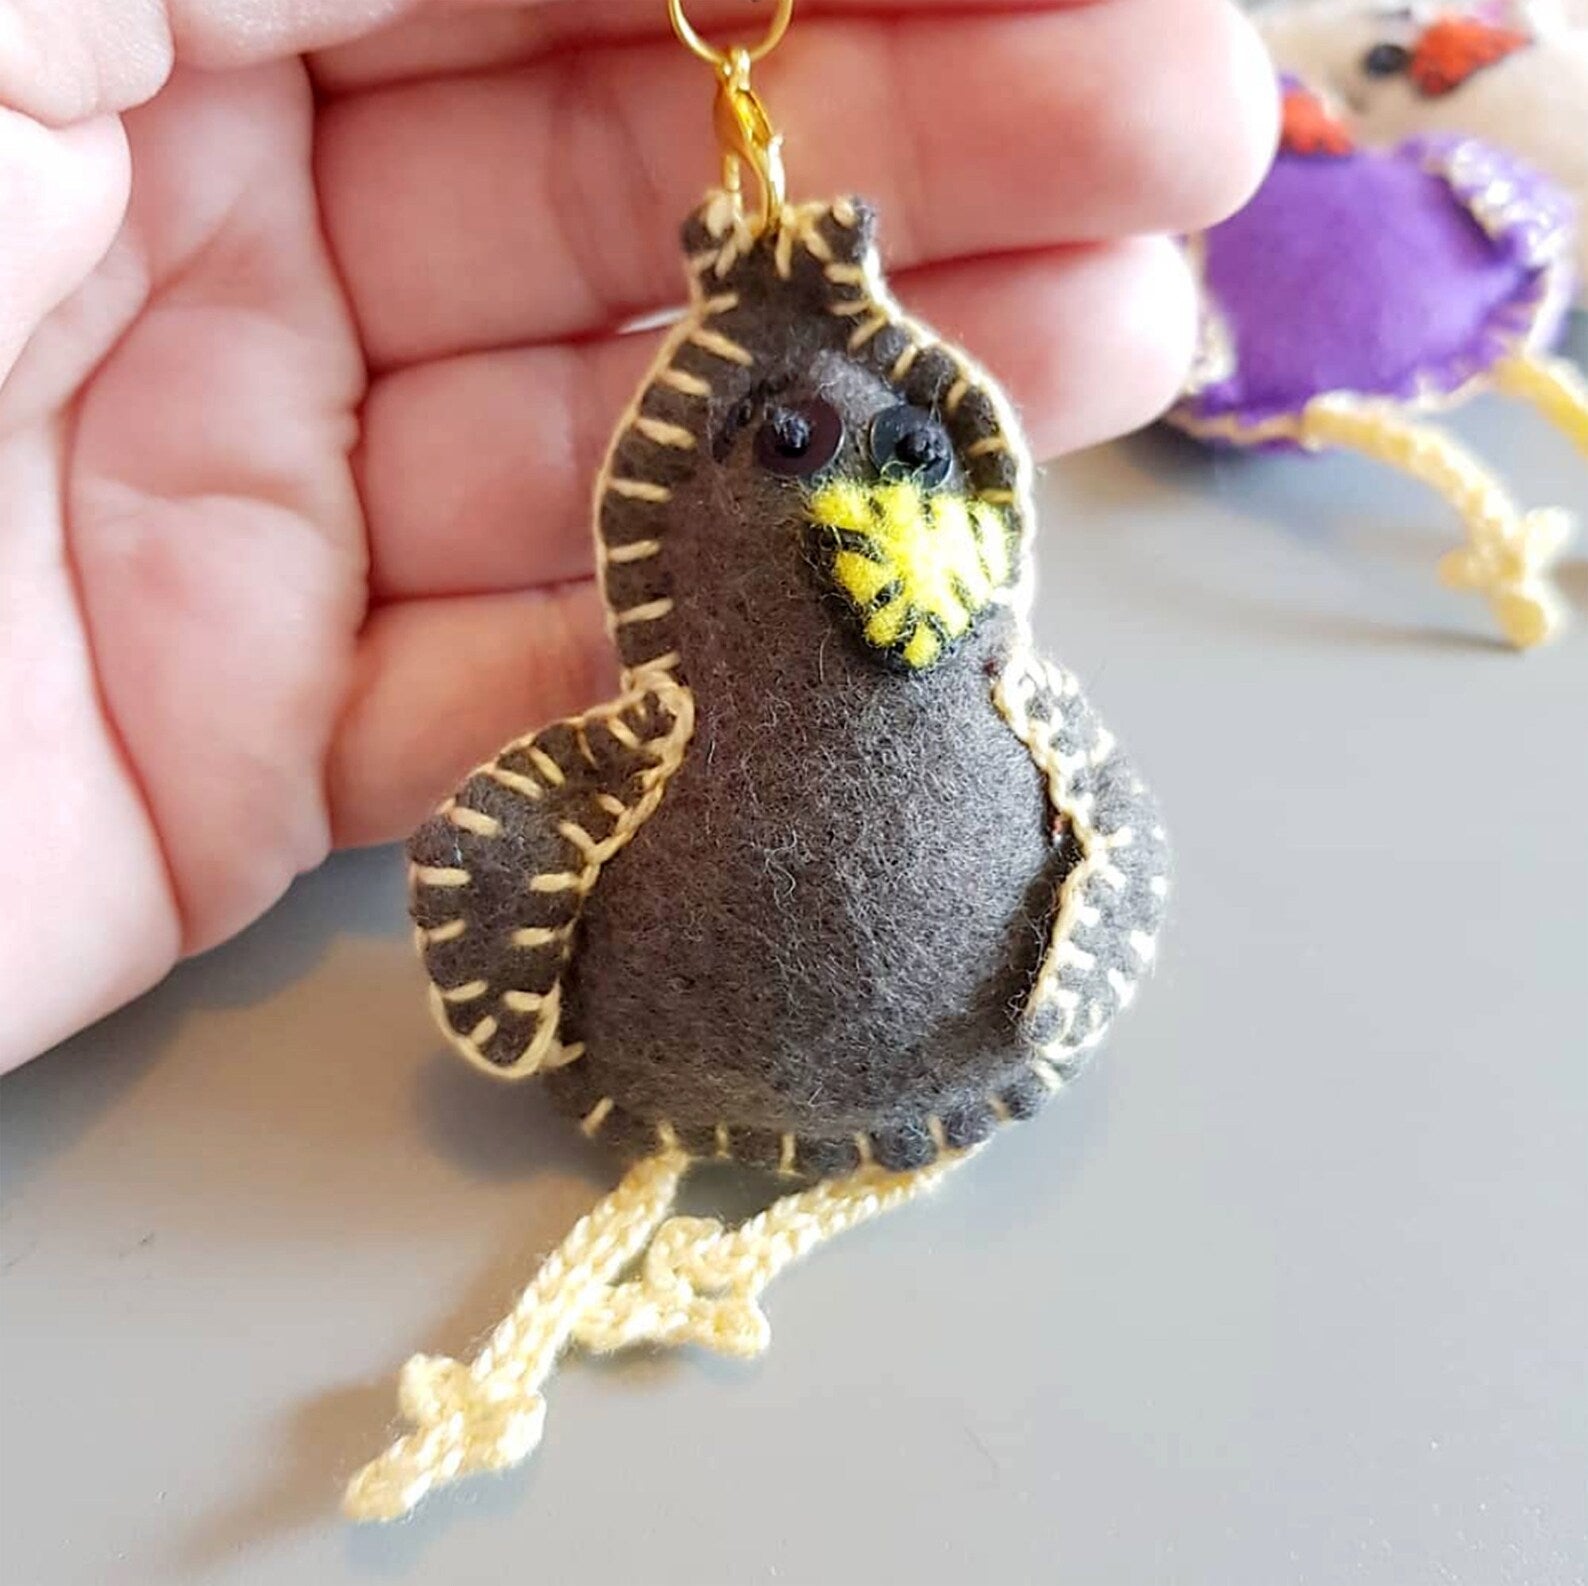 "Experience the charm of handmade artistry with CocoFlower's Felt Bird creation."